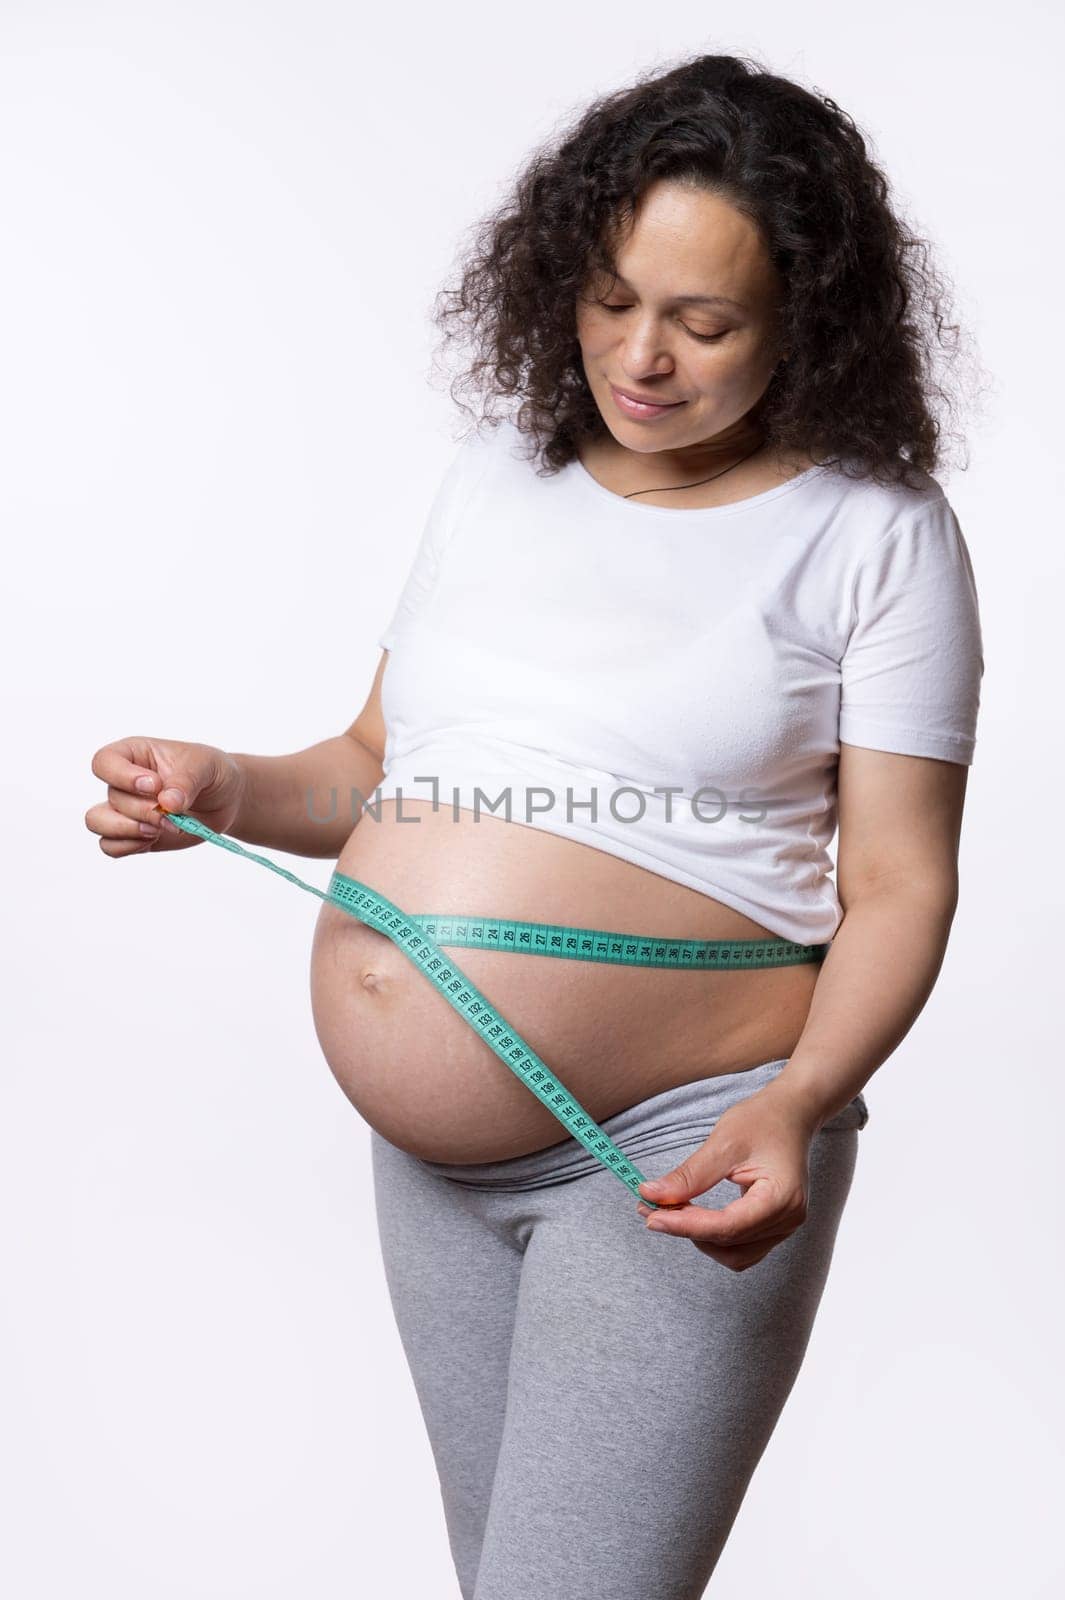 Multi-ethnic gravid woman measures her stomach with measuring tape over white background. Pregnant belly measurement. Baby health monitoring concept. Pregnancy. Maternity. Women's health and body care